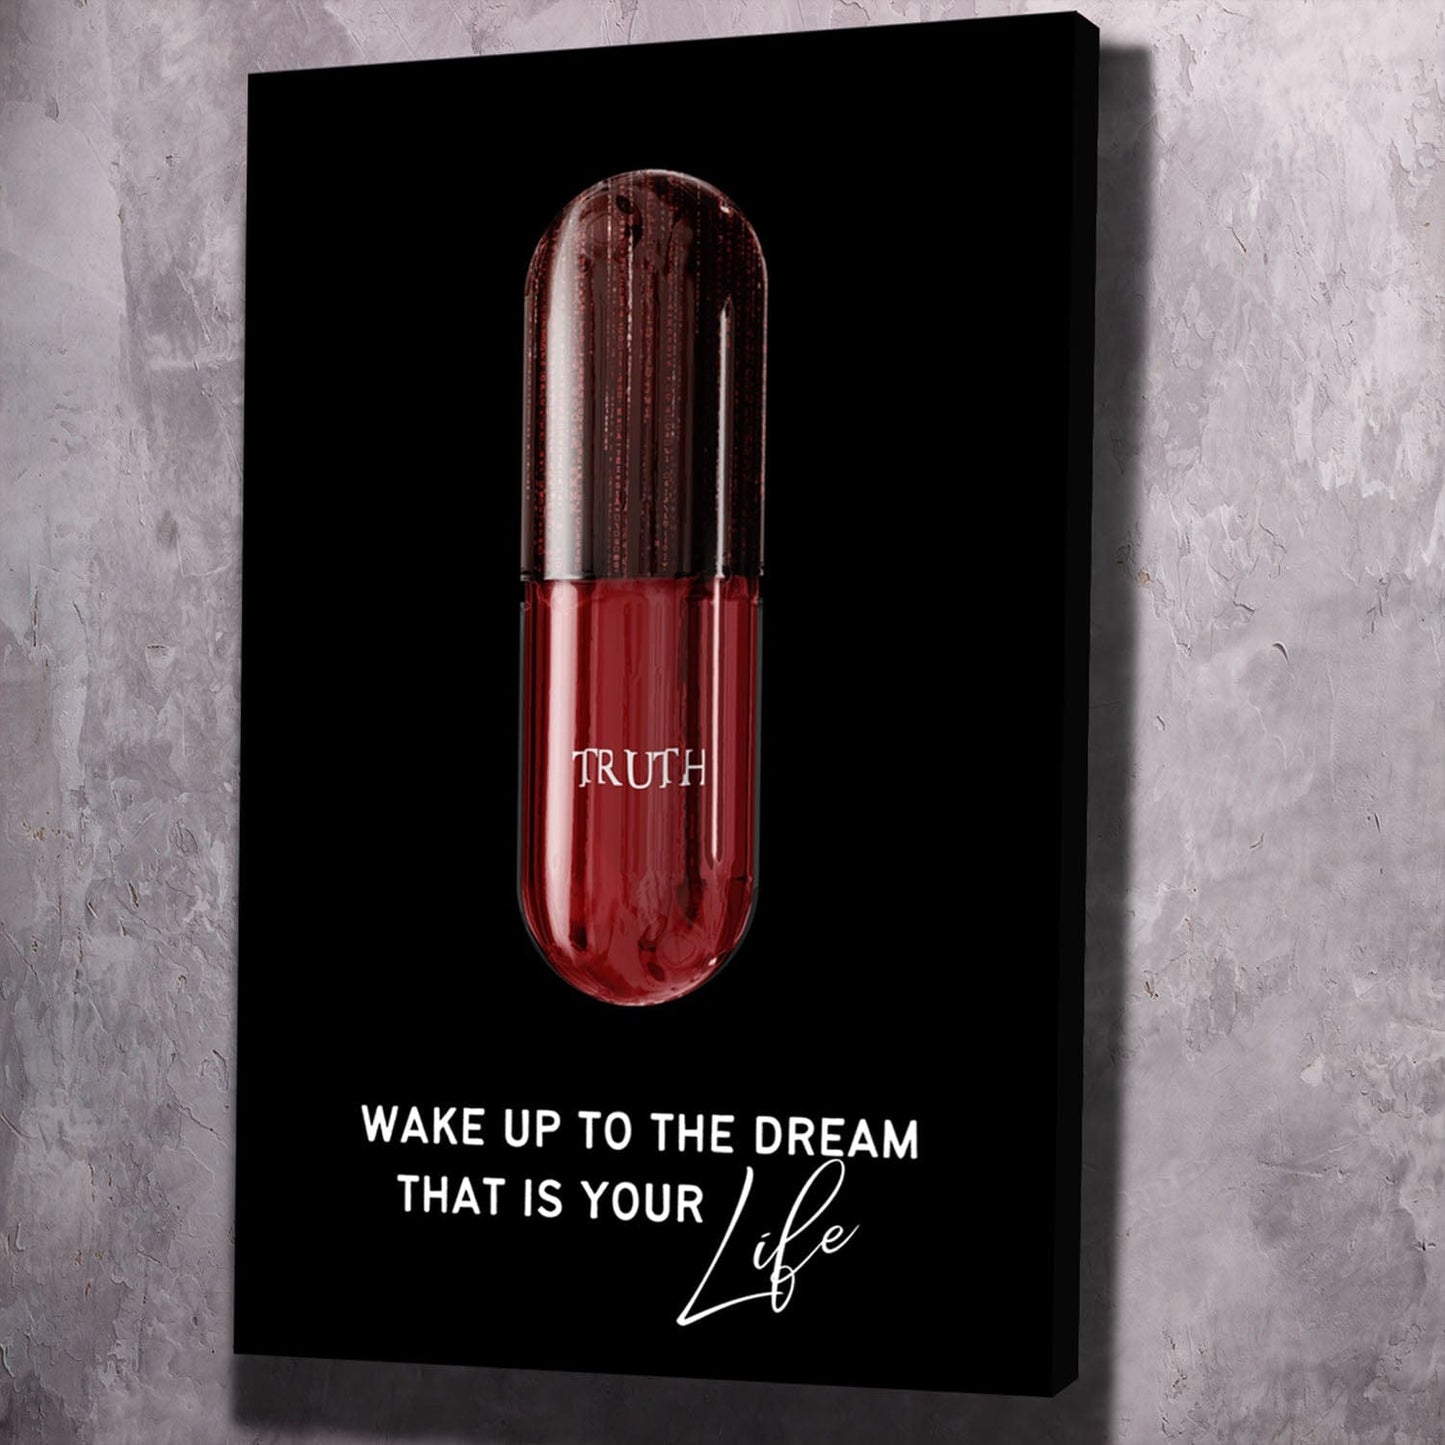 Red Pill - Wake Up to the Dream - Matrix Inspired Wall Art | Inspirational Wall Art Motivational Wall Art Quotes Office Art | ImpaktMaker Exclusive Canvas Art Portrait